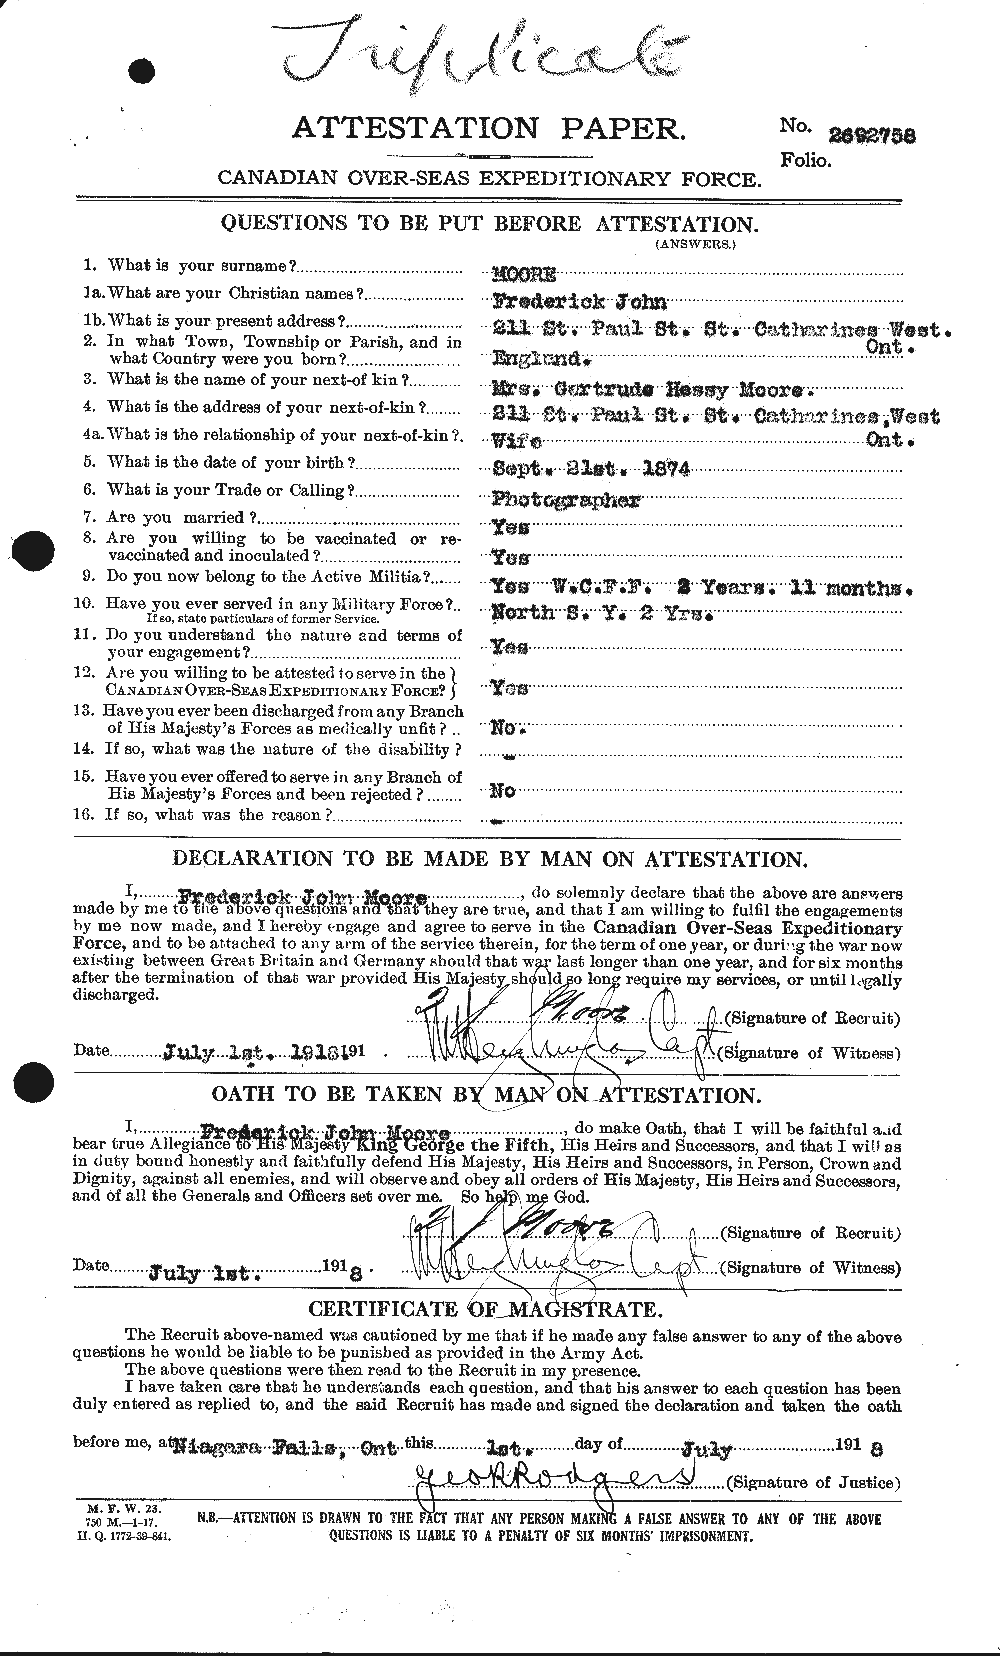 Personnel Records of the First World War - CEF 506753a